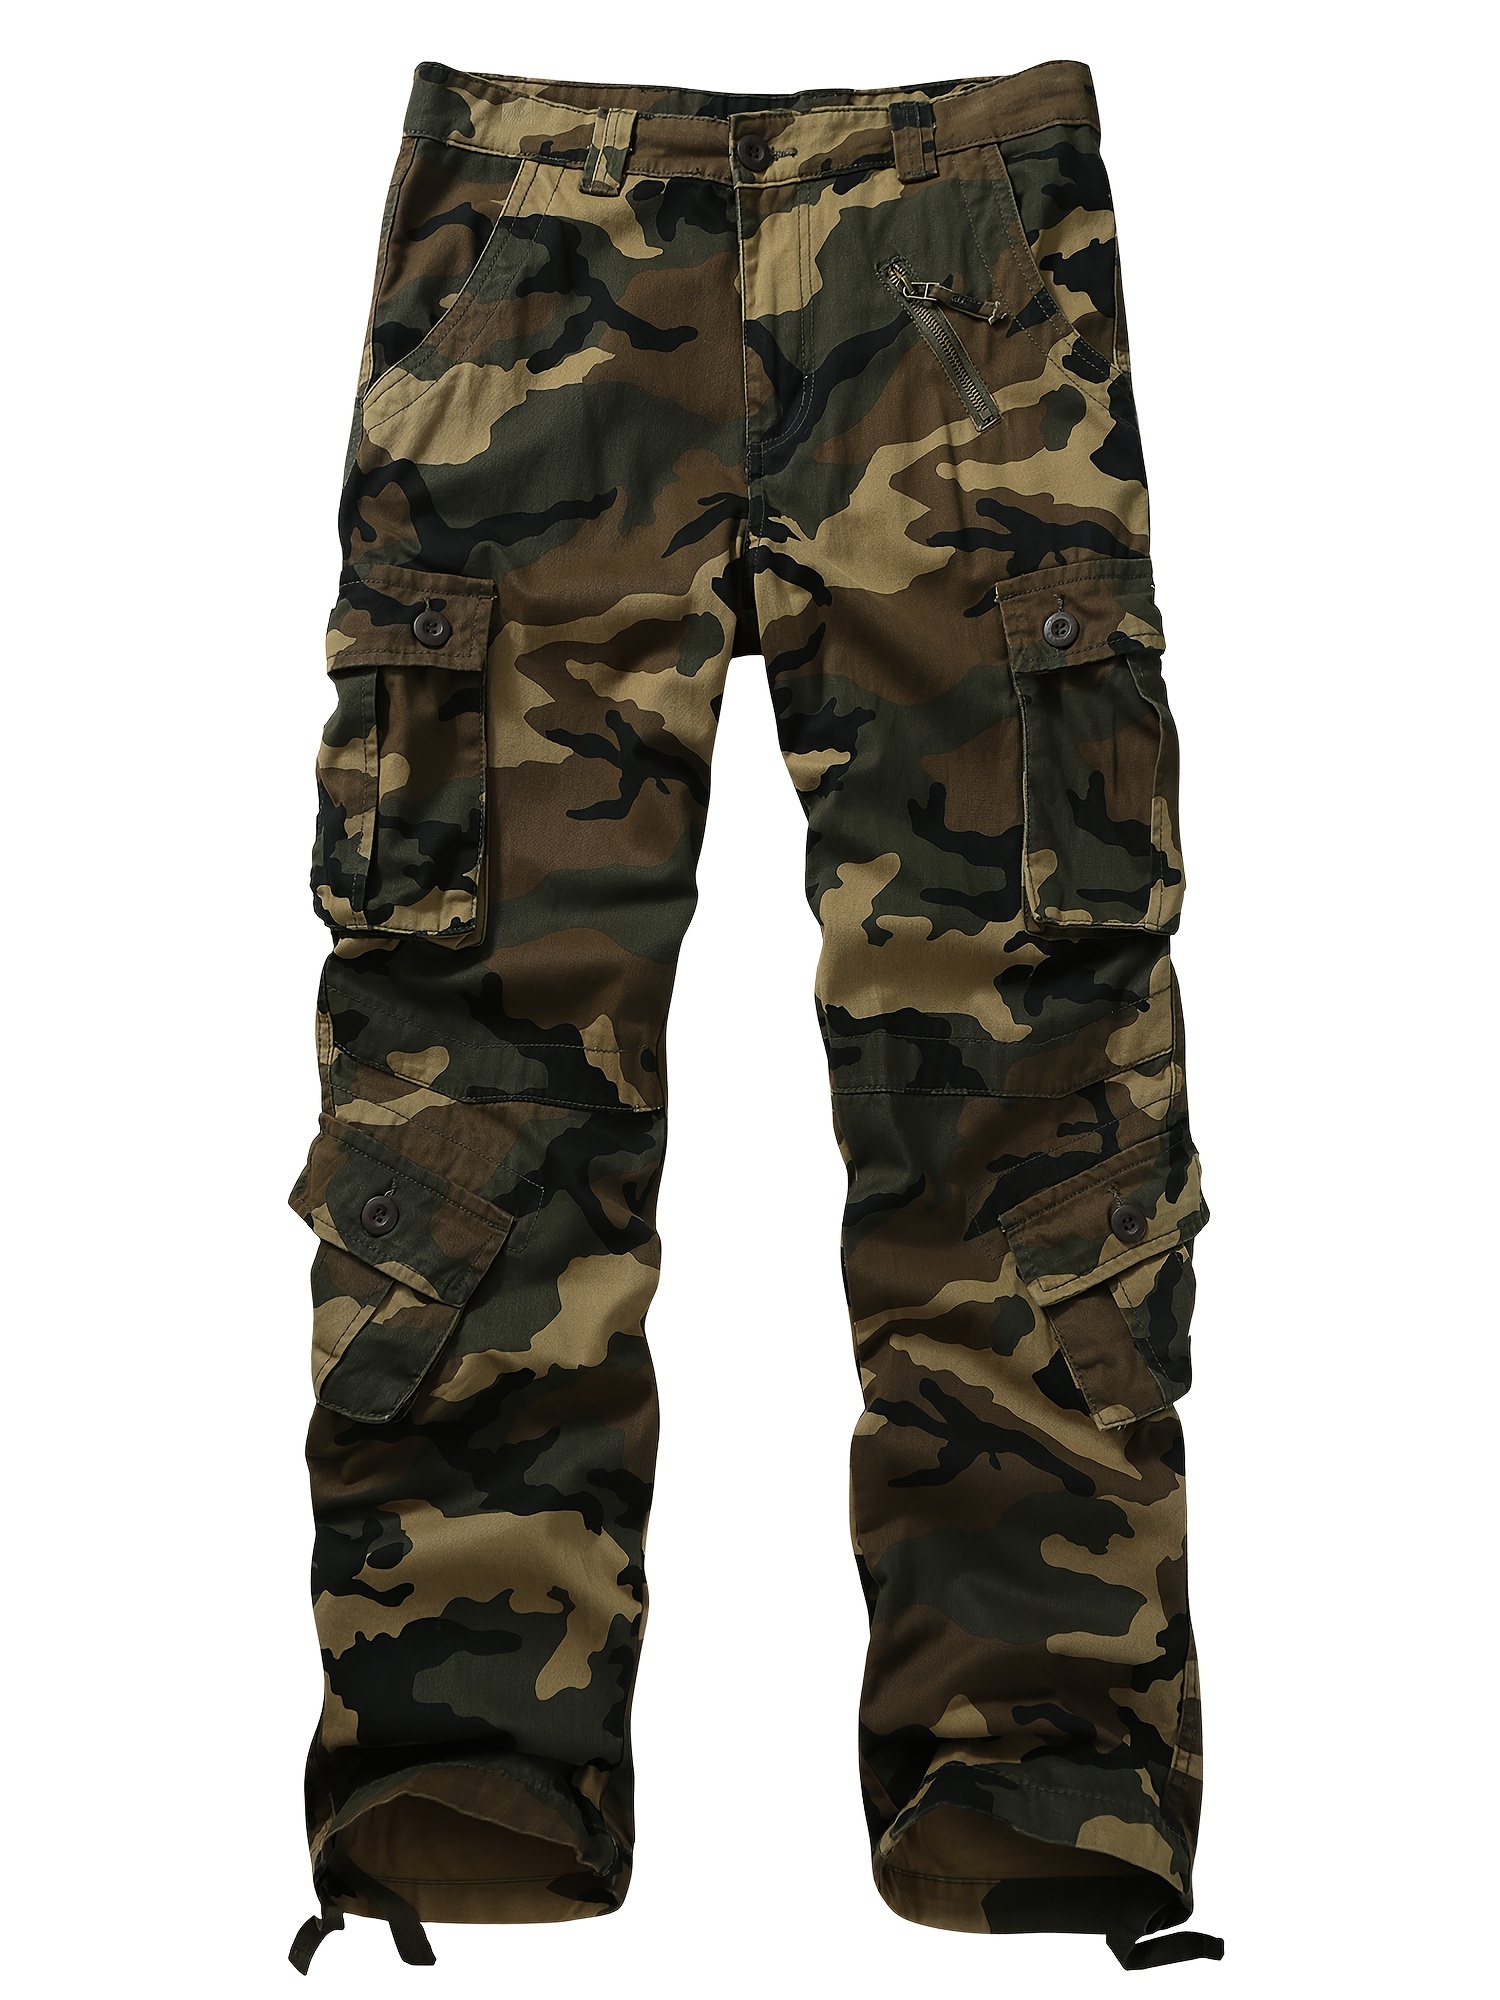 Solid Cotton Camo Multi Flap Pockets Men's Tactical Straight Leg Cargo  Pants, Loose Casual Outdoor Pants, Men's Work Pants For Hiking Fishing  Angling